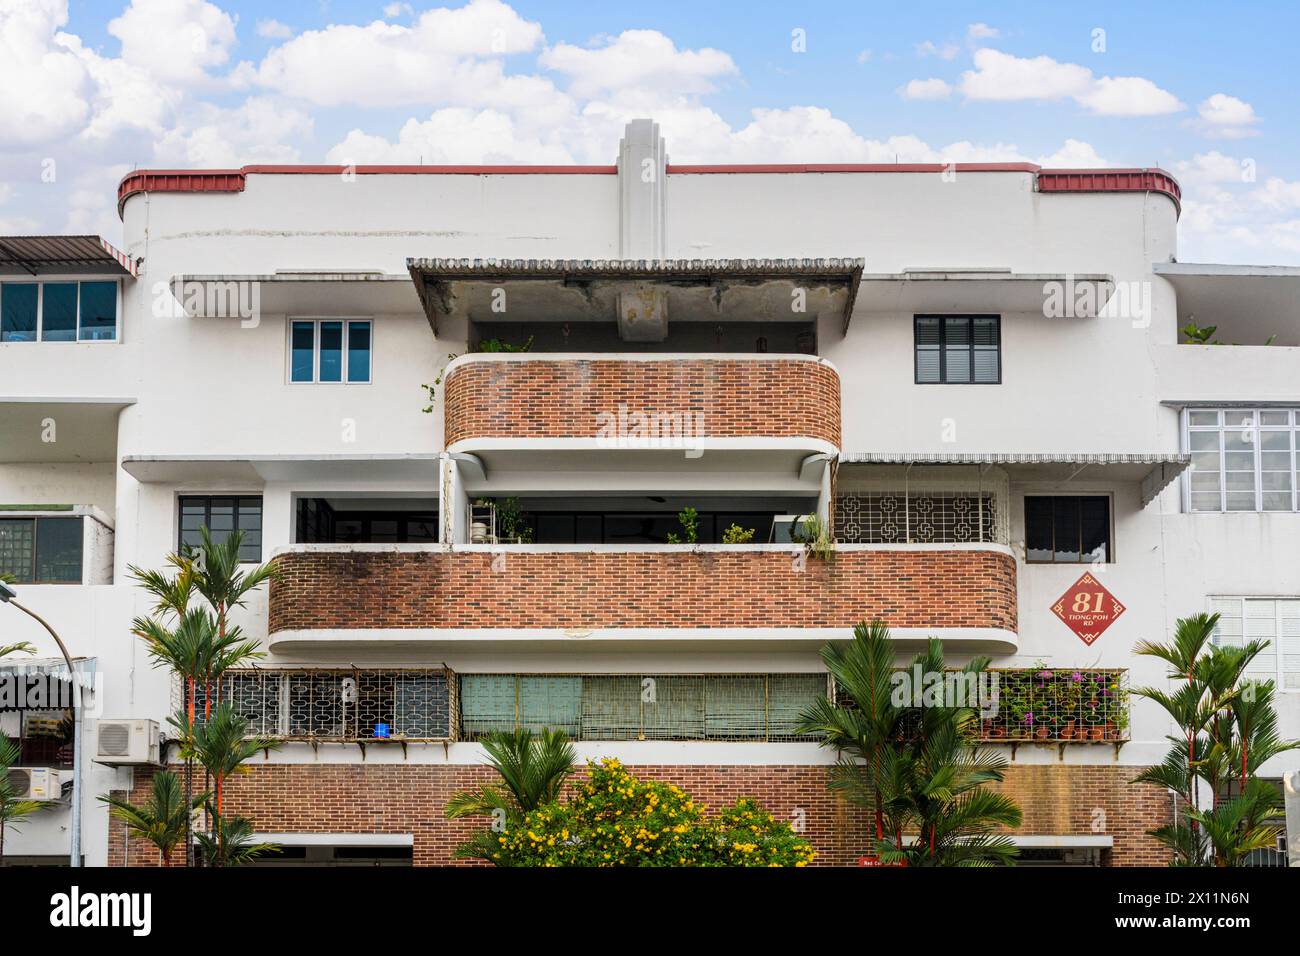 Streamline Moderne Art Deco architectural style building in the Tiong Bahru Estate, Singapore Stock Photo